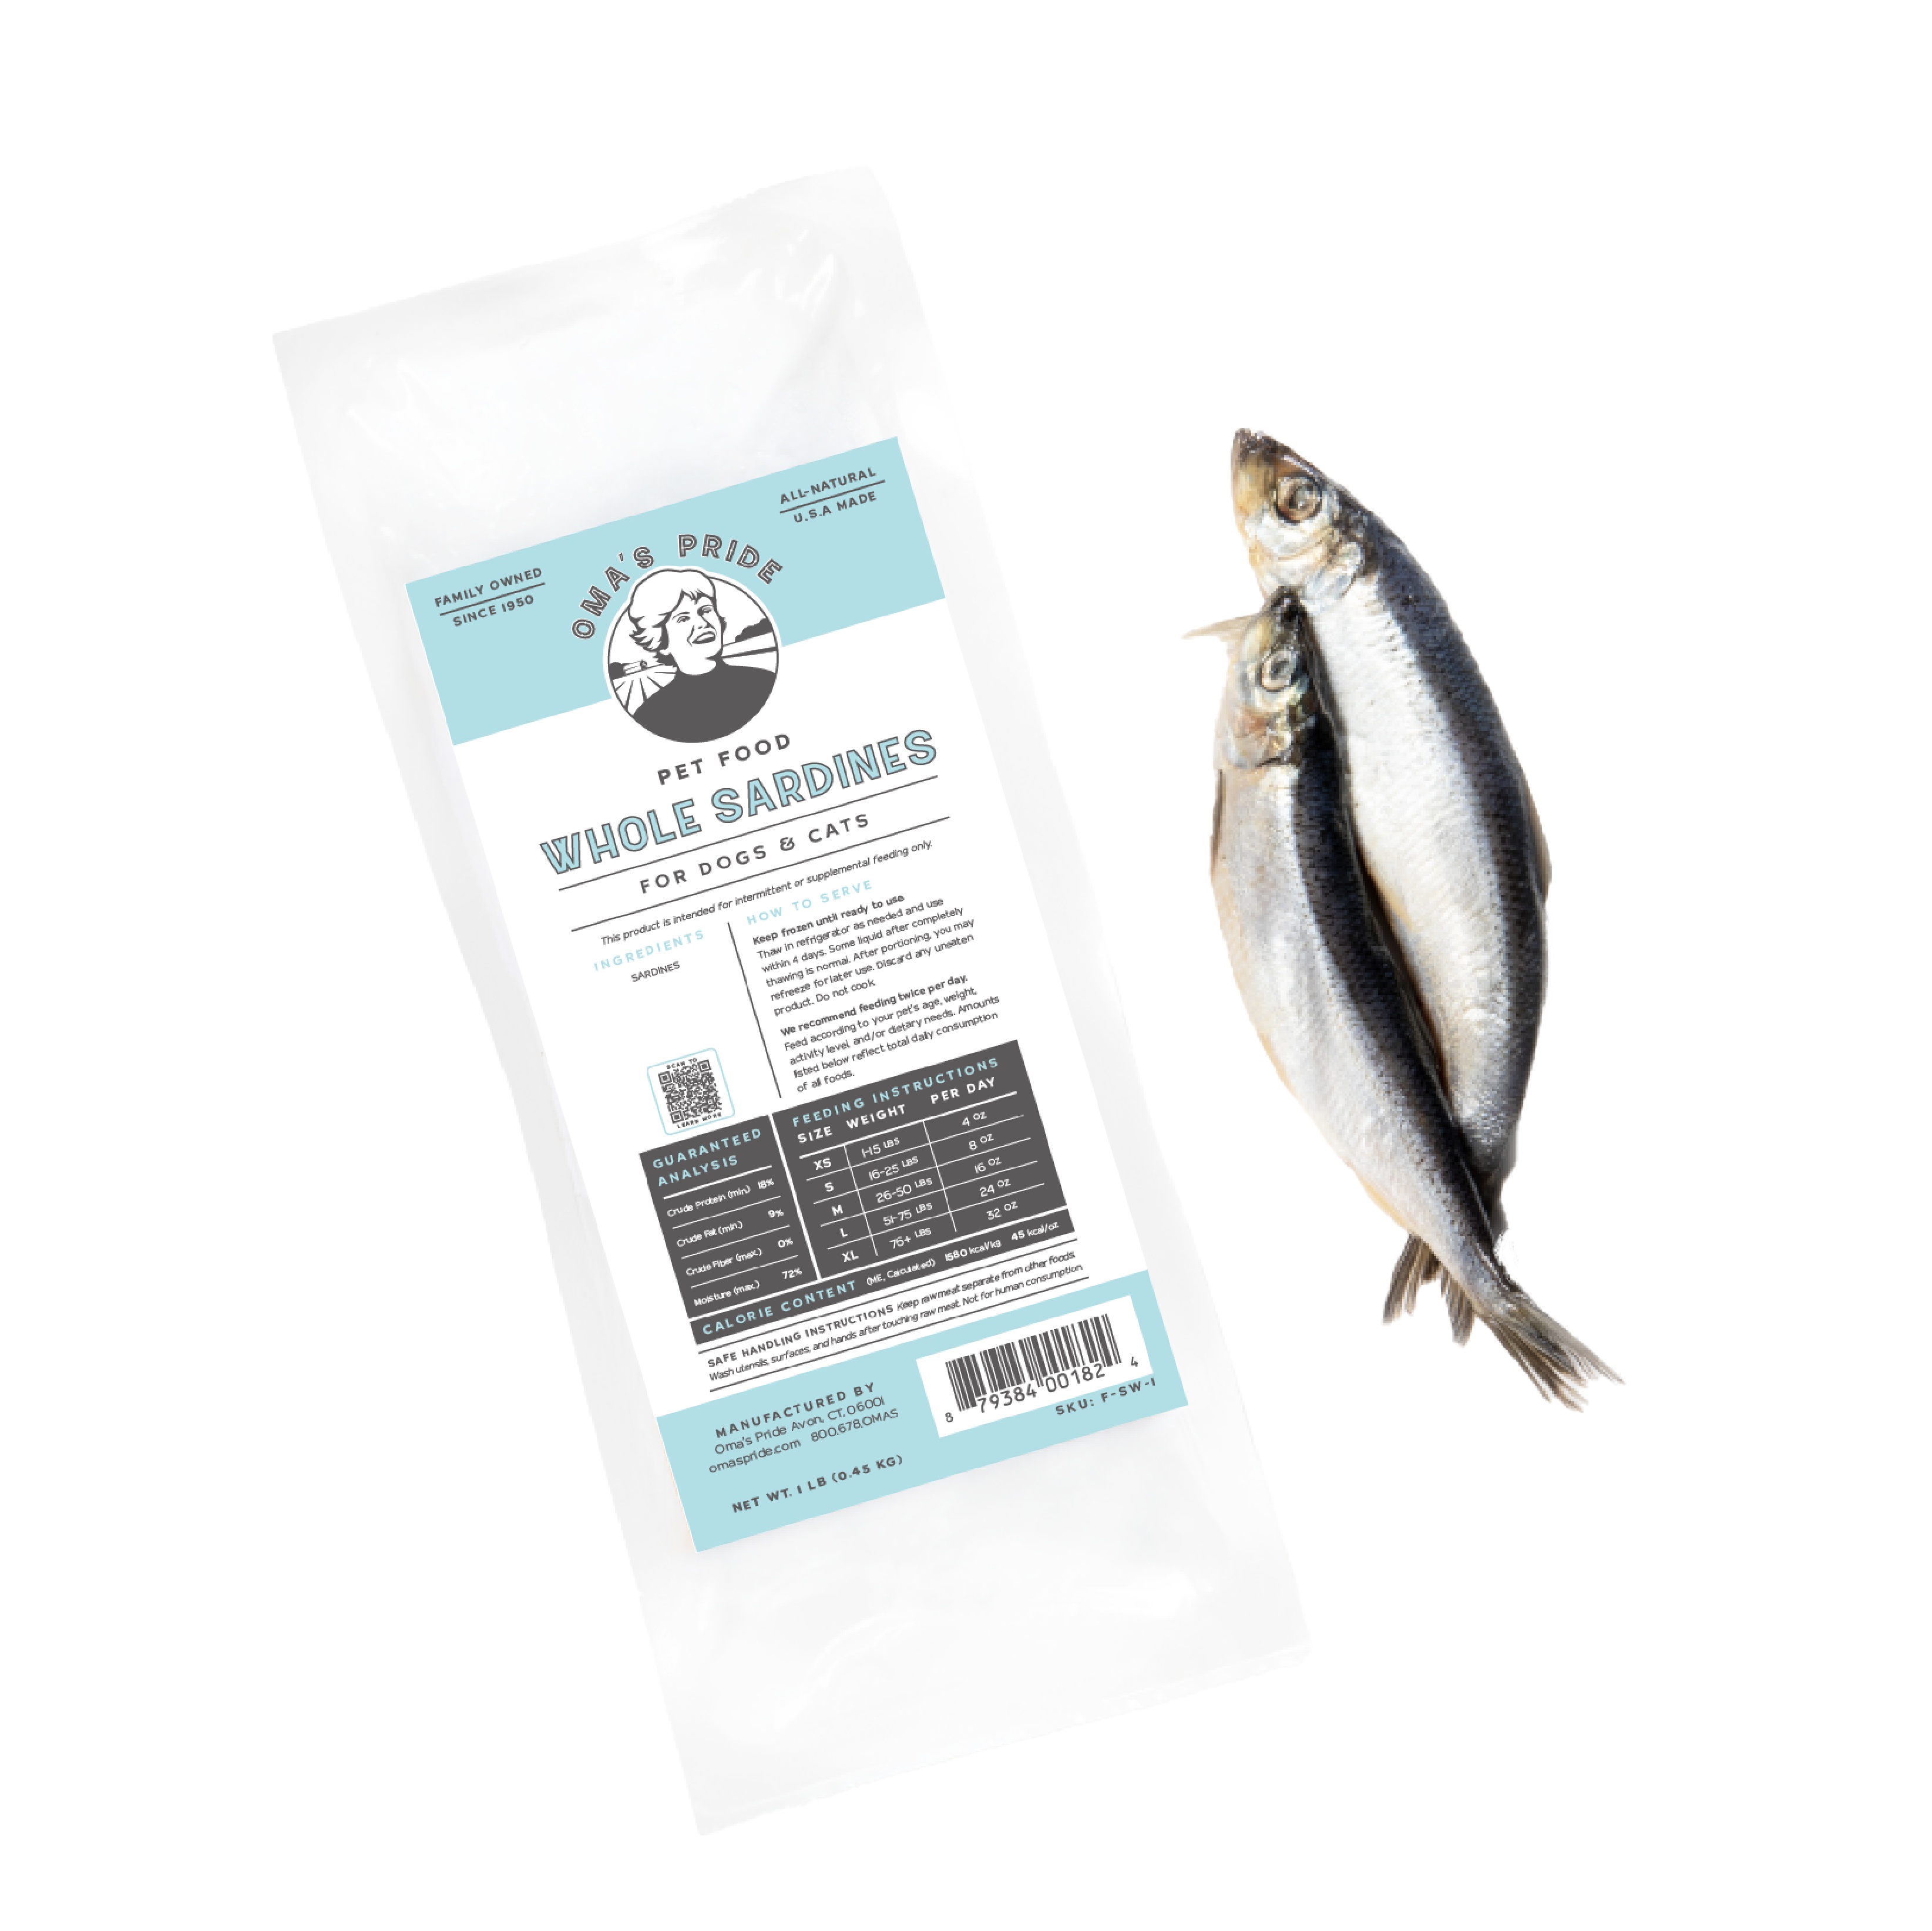 Buy Fresh Whole Sardines For Dogs & Cats - Home Delivered